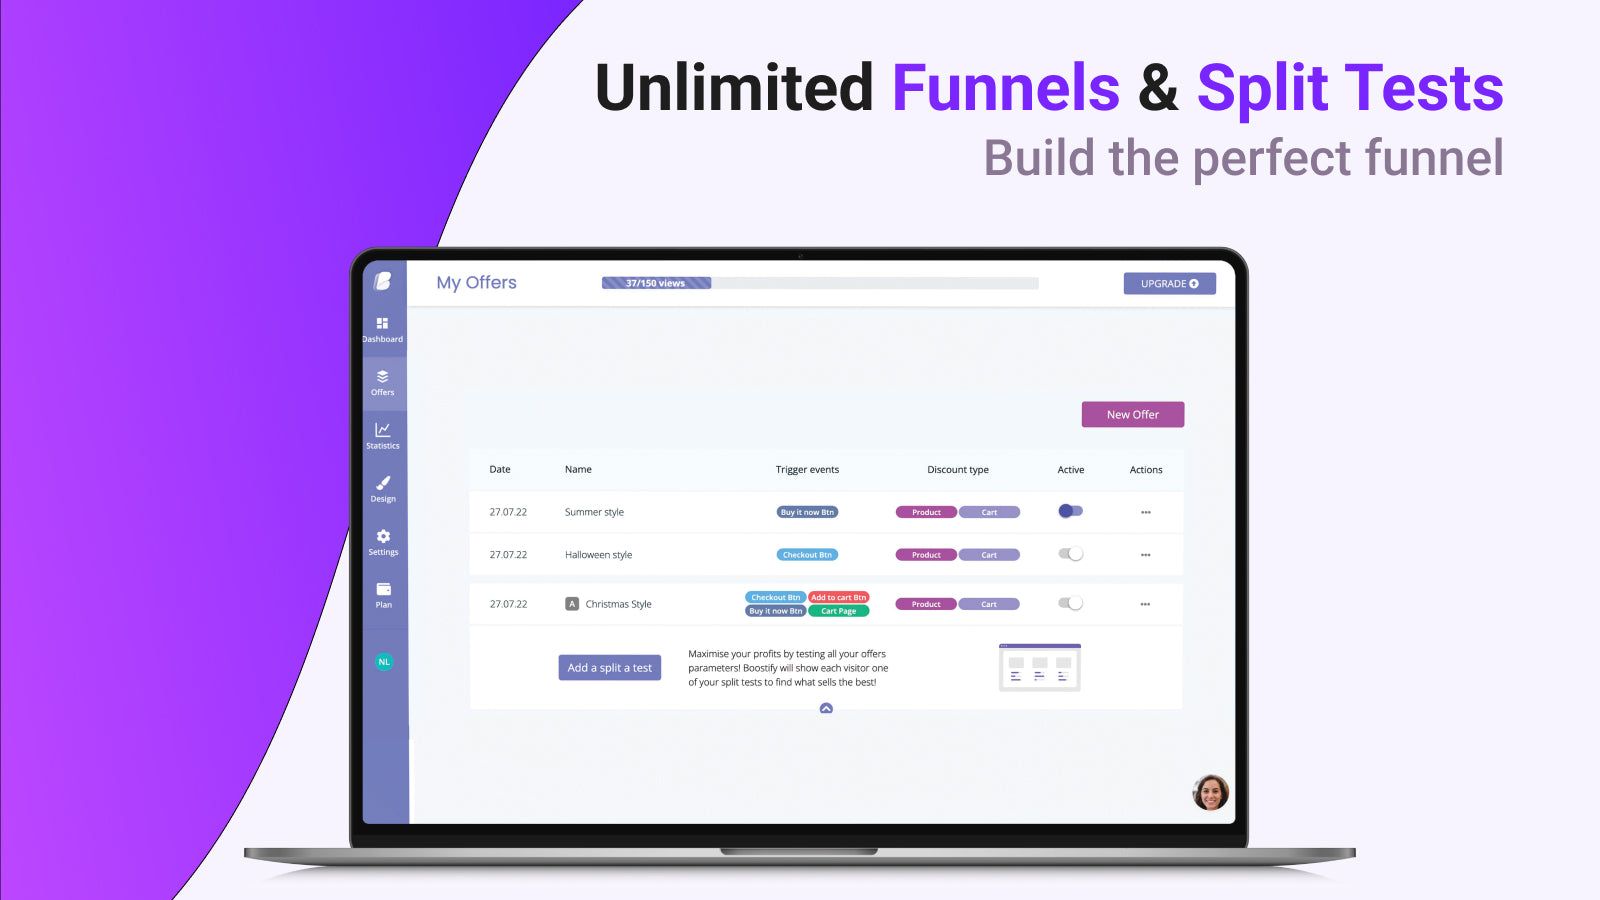 Unlimited Funnels & Split Tests, build the perfect funnel